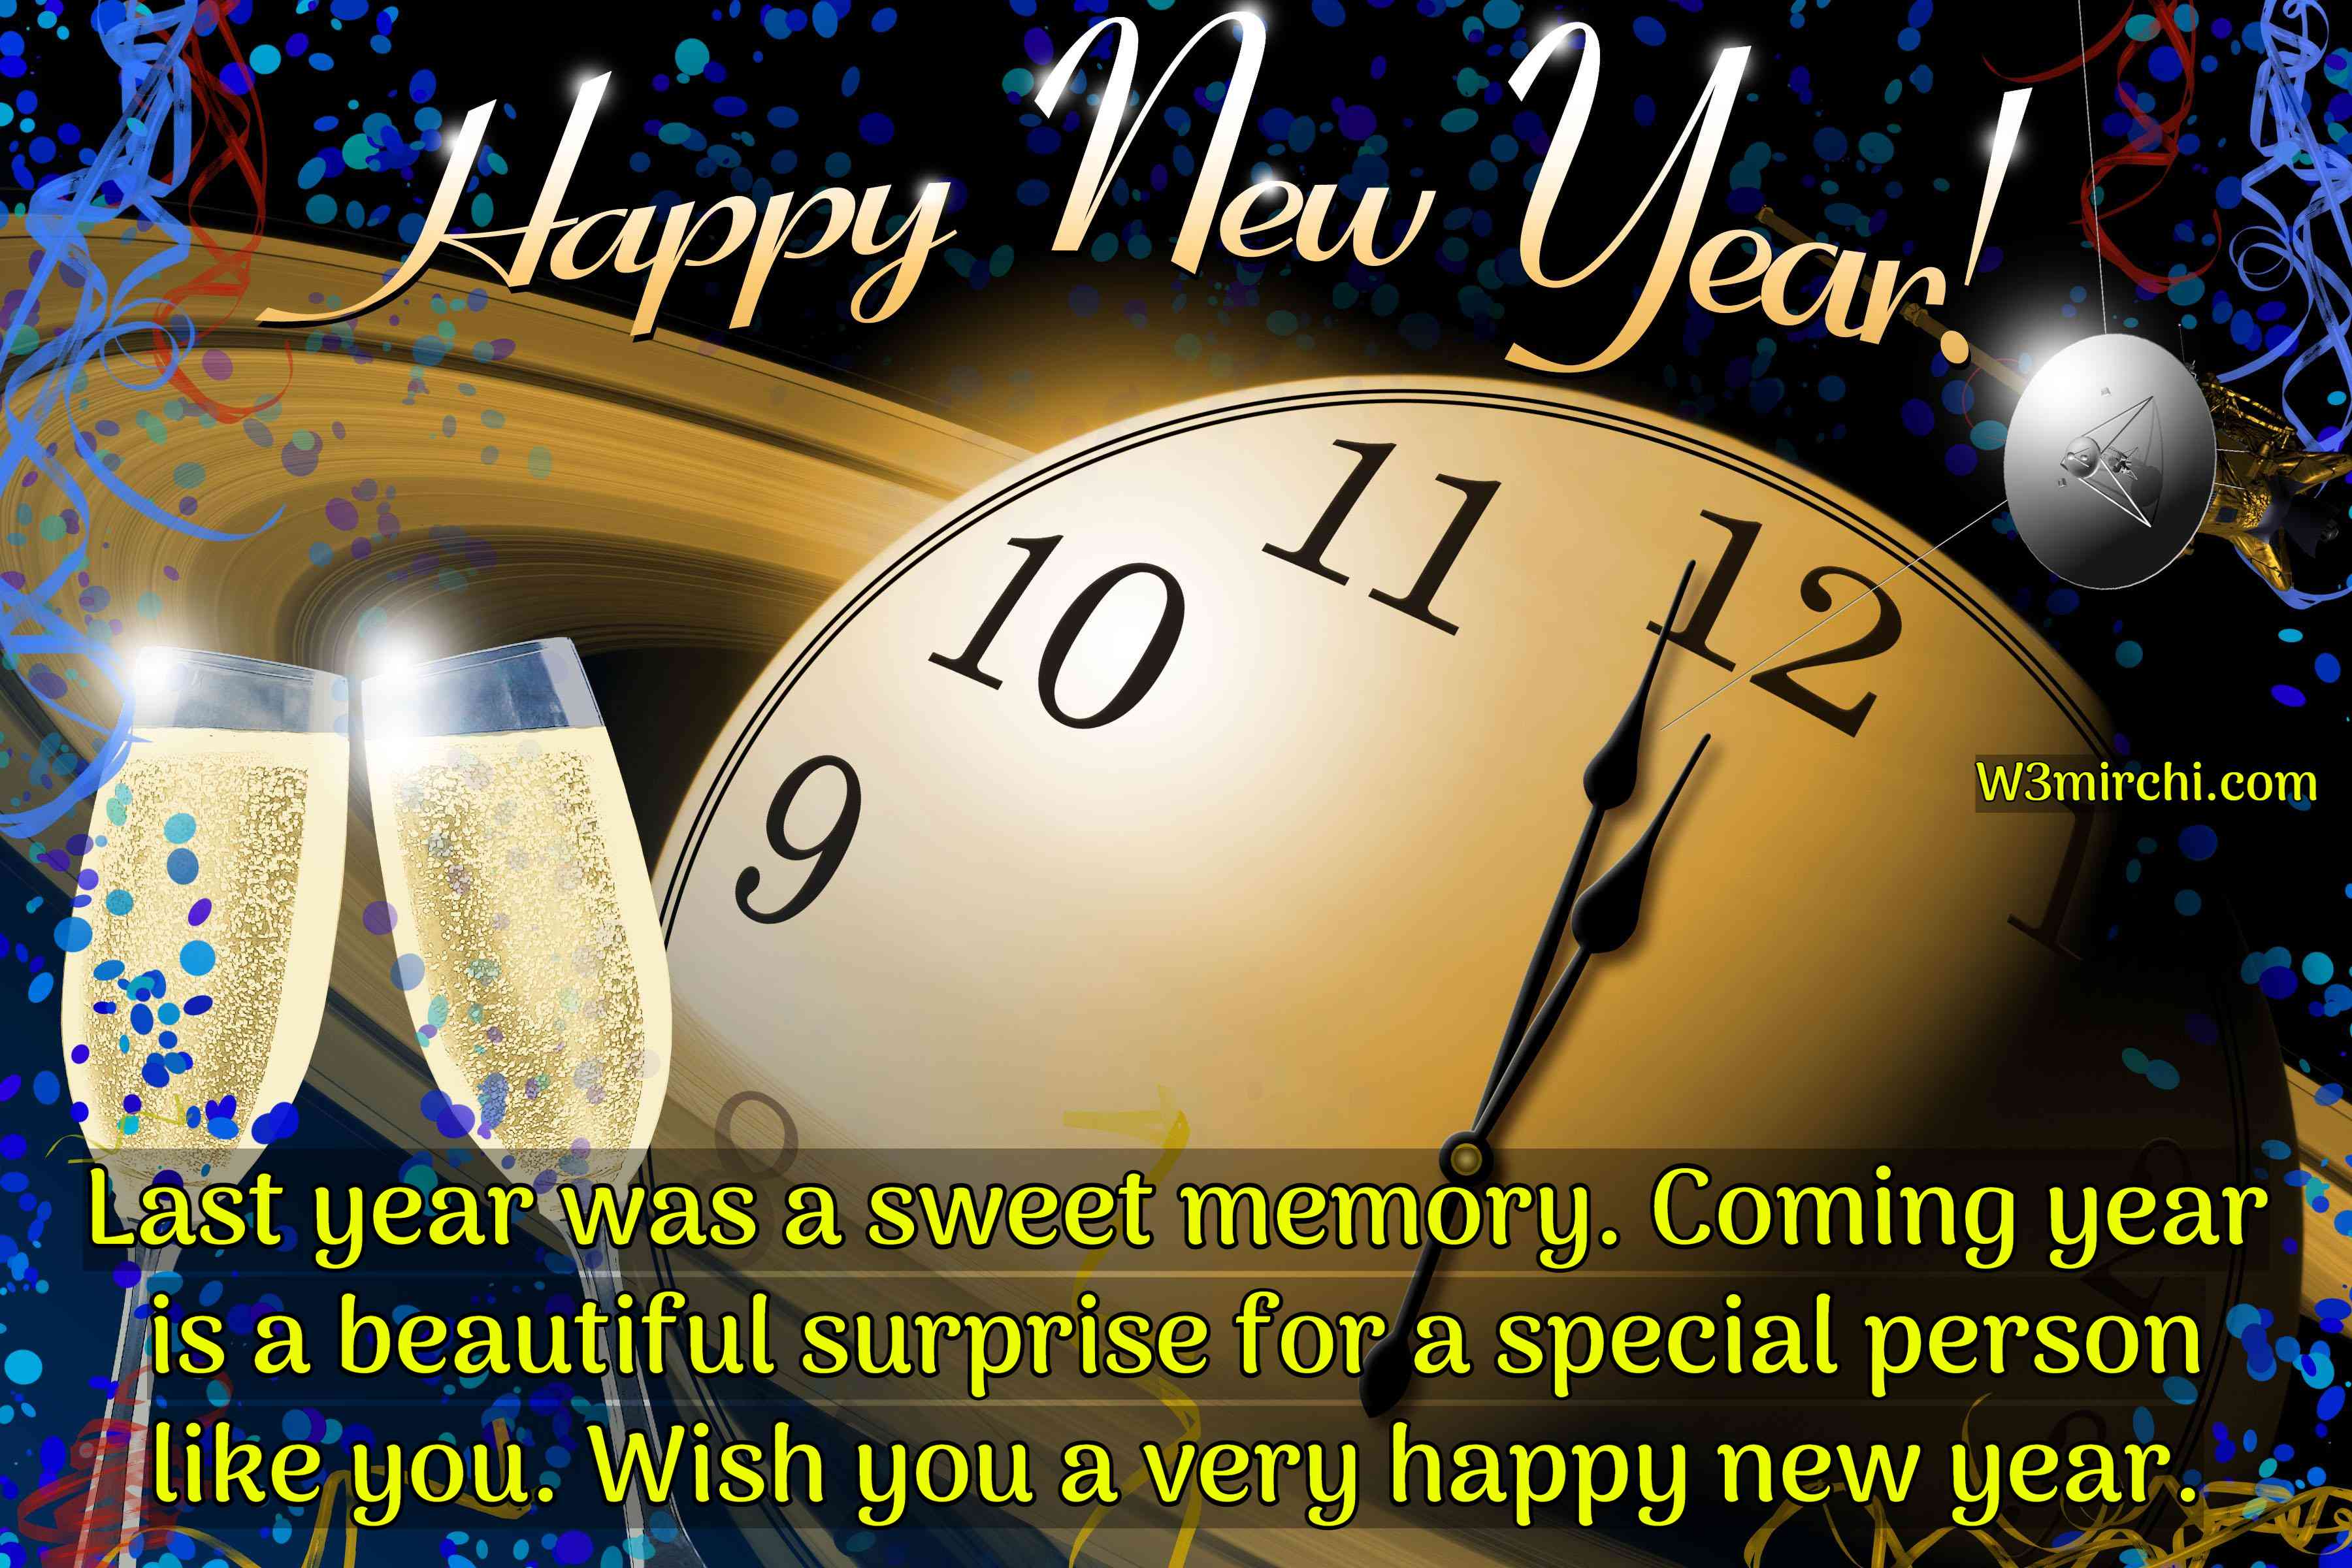 Wish you a very happy new year.